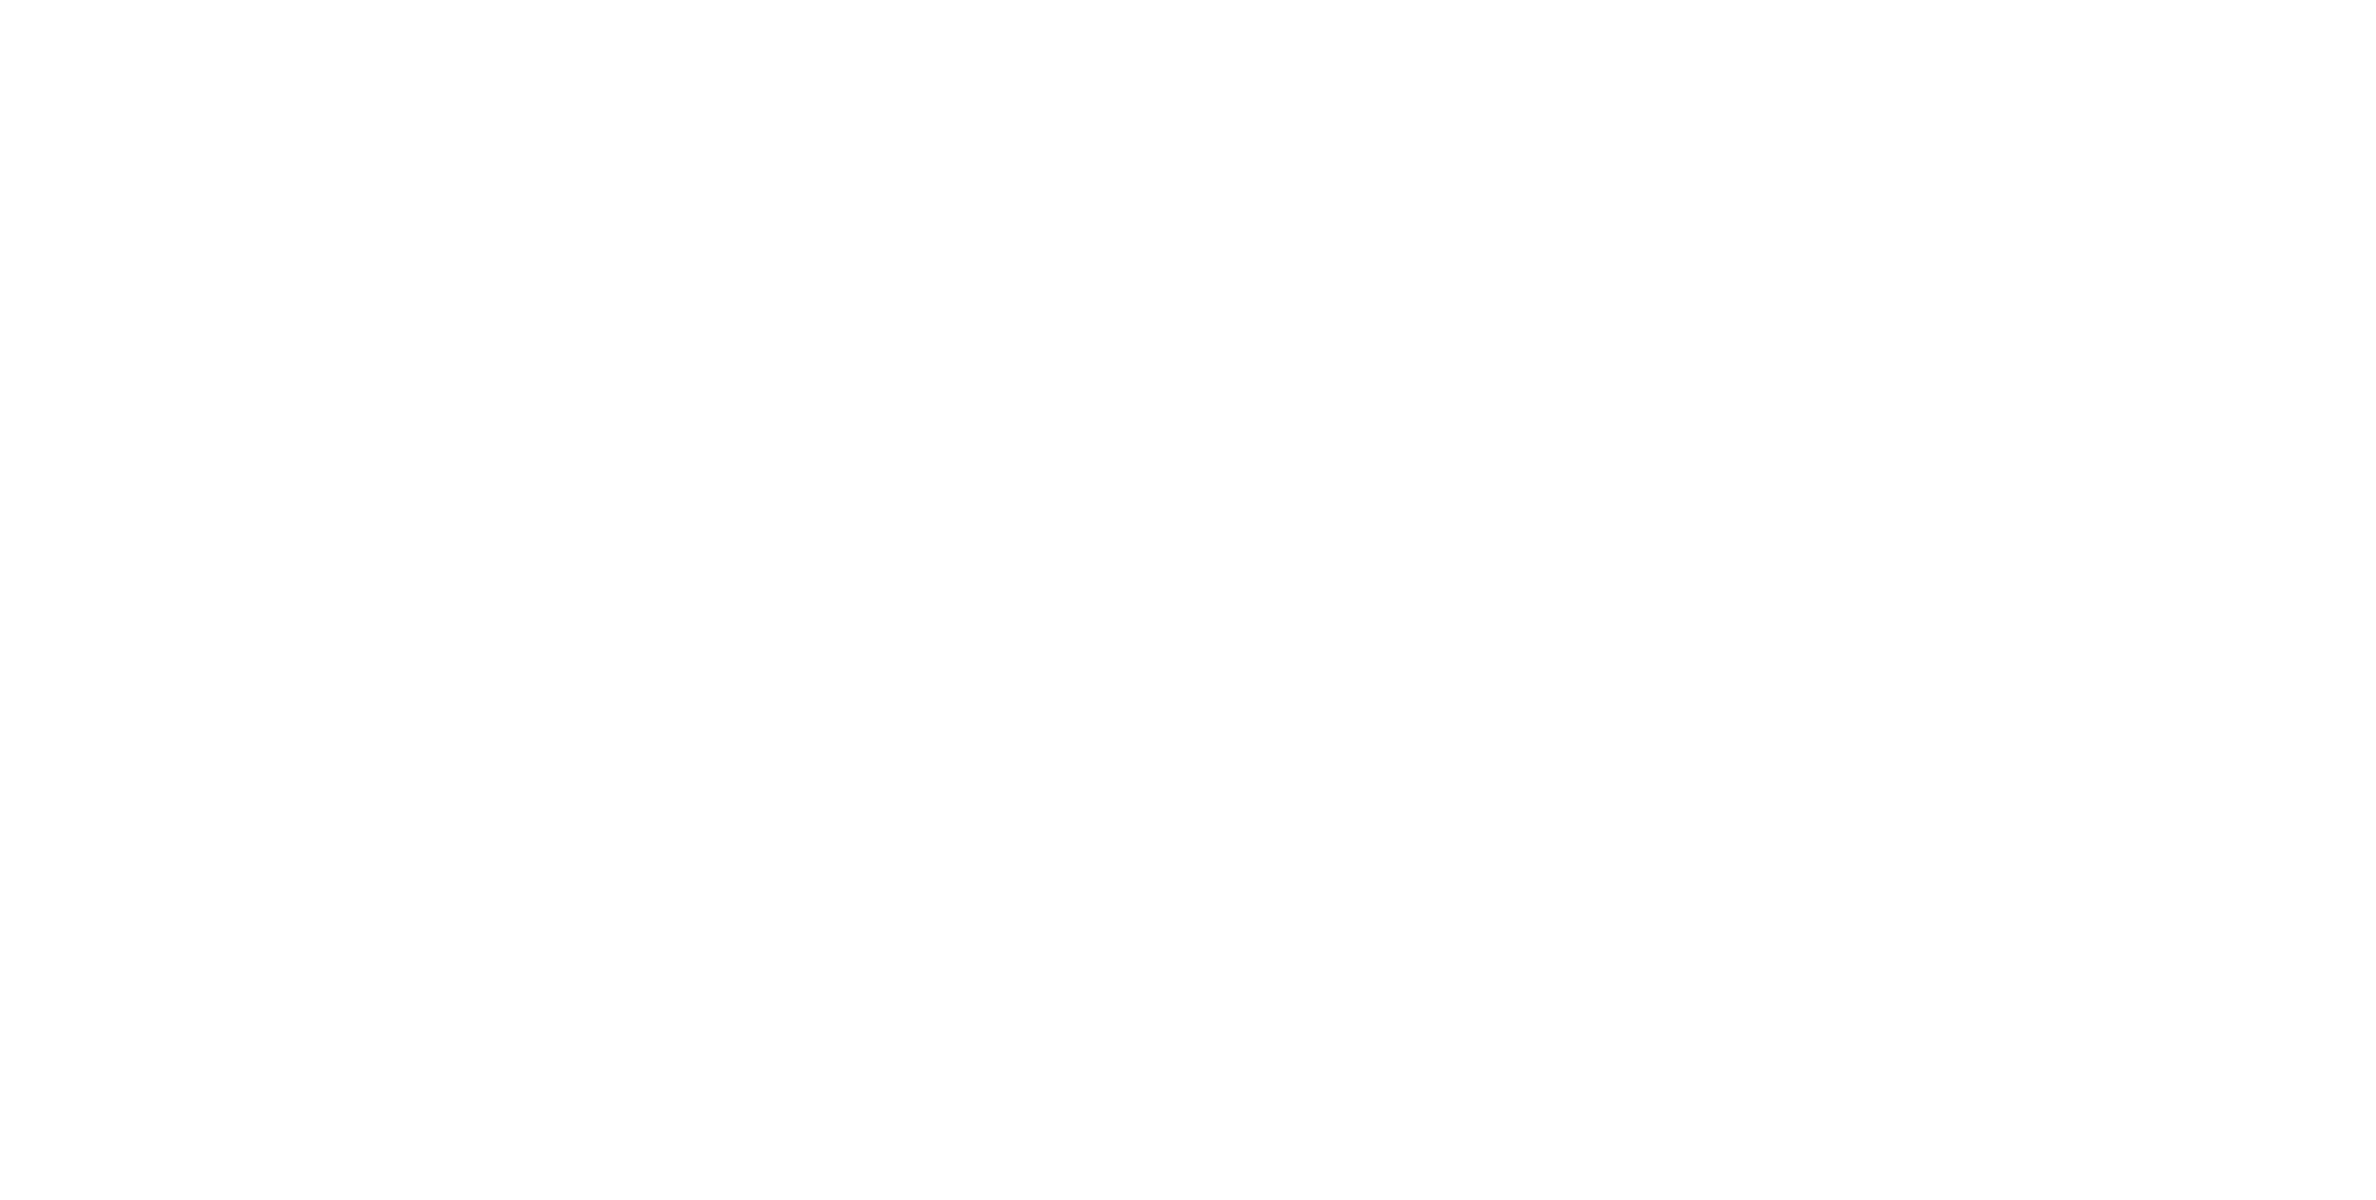 Care Talents